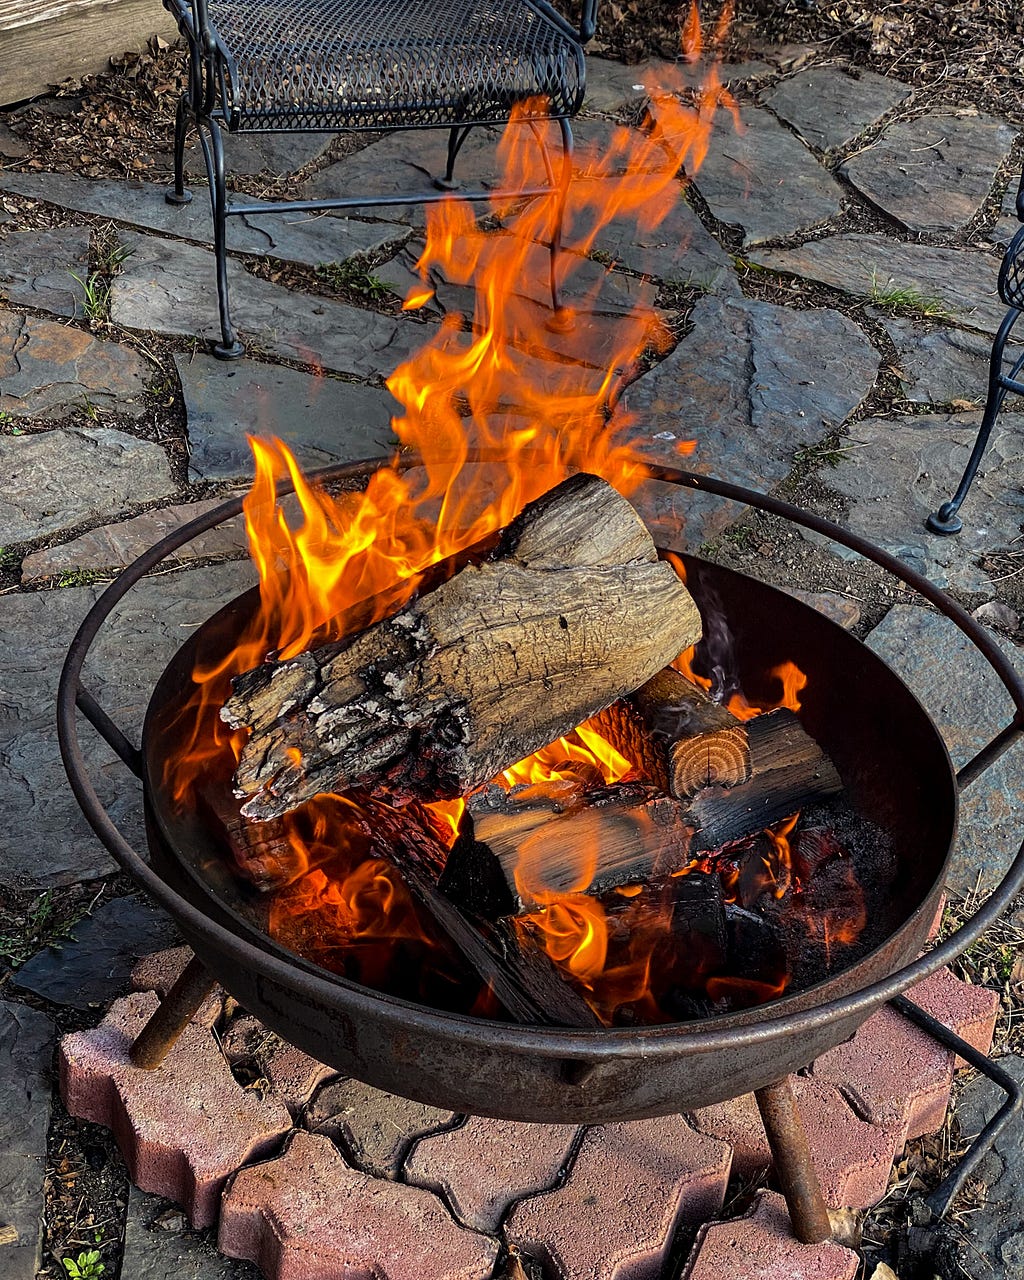 A picture of a wood fire in a metal, standalone fire place on an outdoor, flagstone patio.